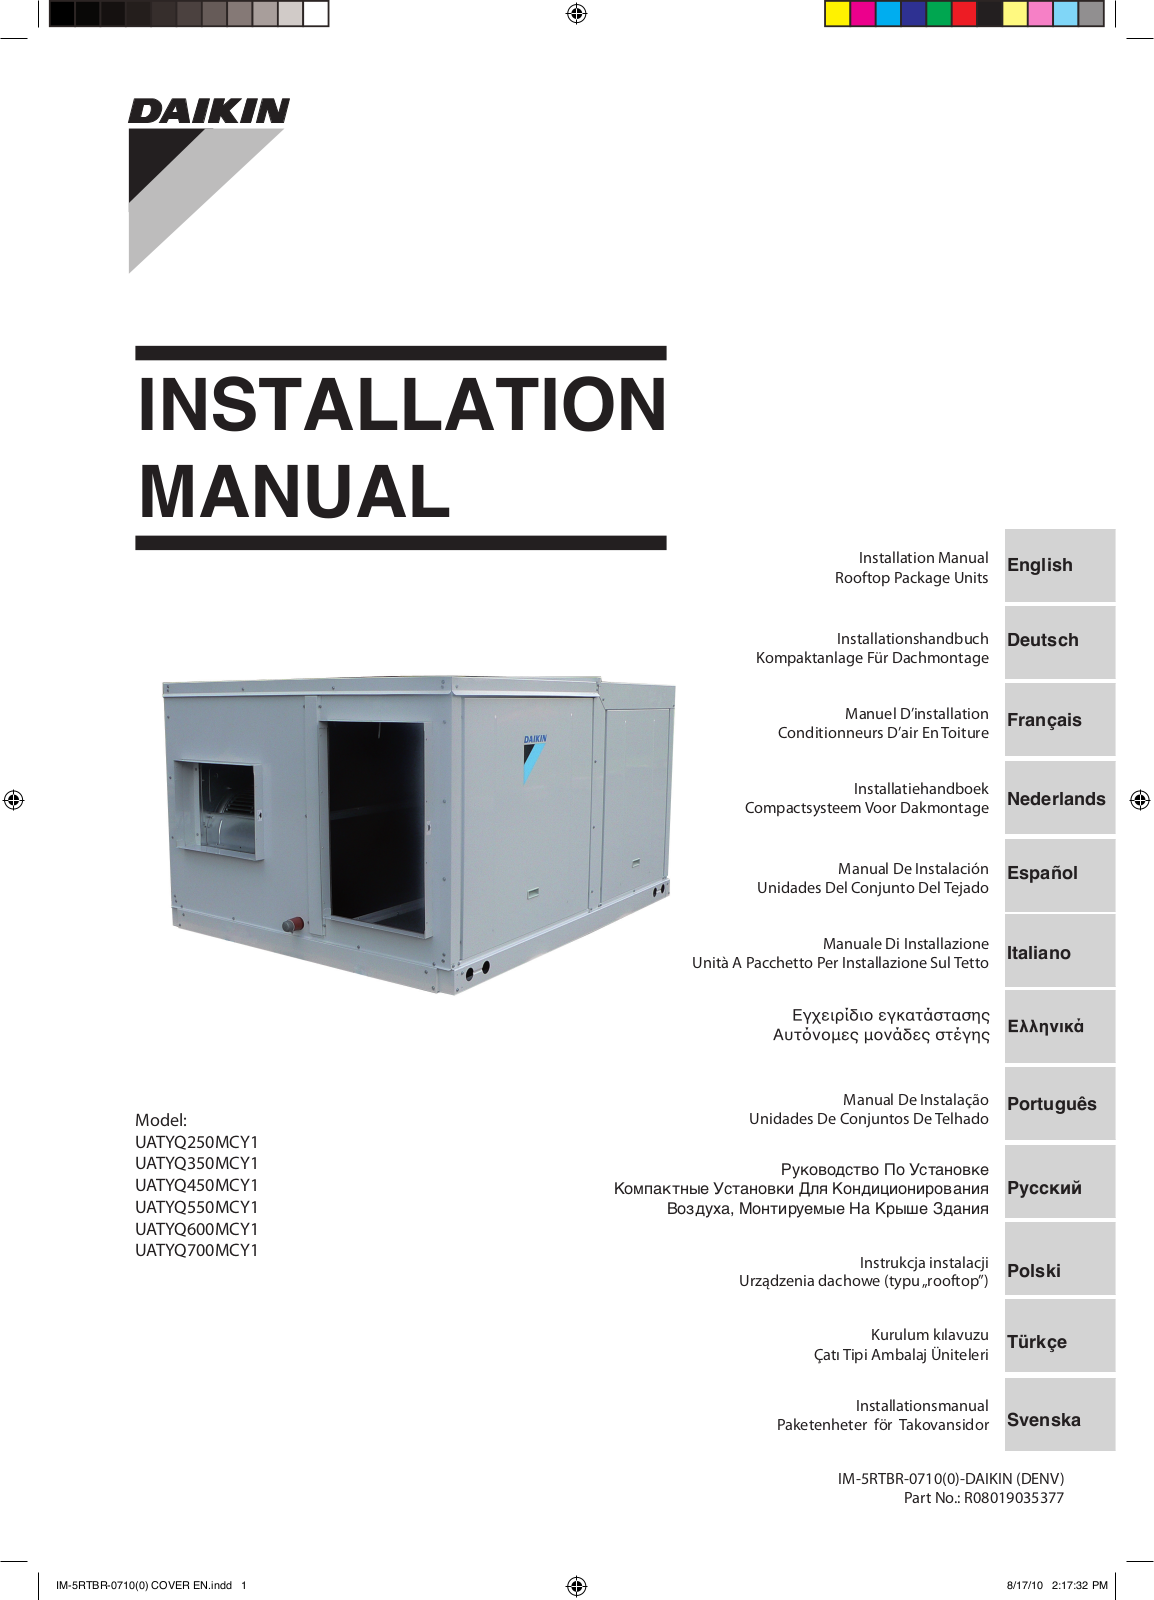 Daikin UATYQ250MCY1, UATYQ350MCY1, UATYQ450MCY1, UATYQ550MCY1, UATYQ600MCY1 Installation manuals